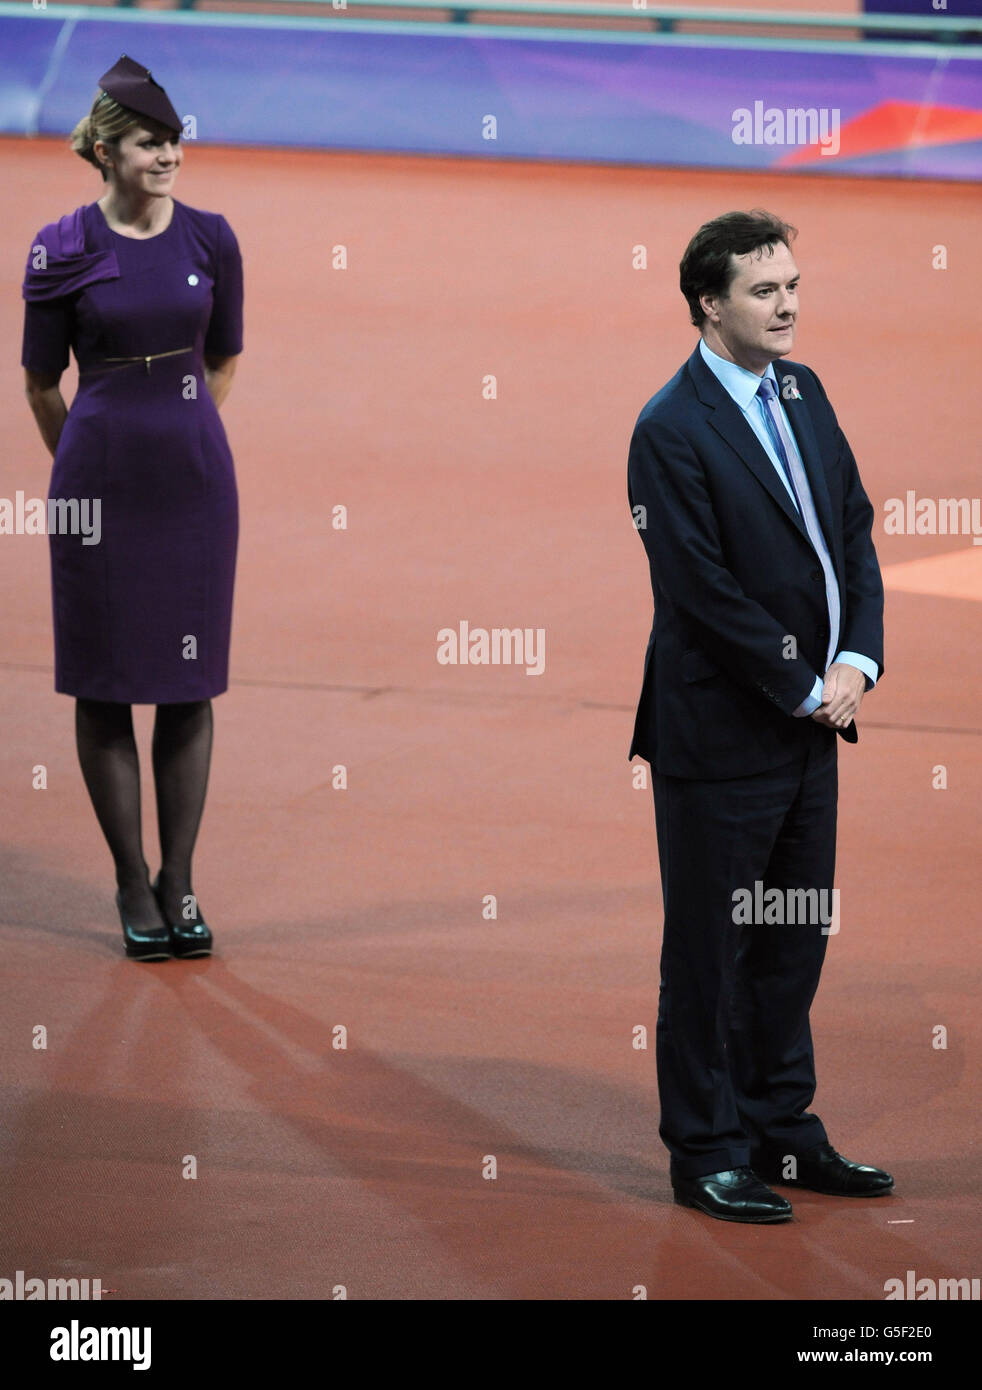 Chancellor George Osborne prepares to present medals for the men's T38 400m race, during which he was loudly booed as his name was announced in the Olympic Stadium, at the Paralympic Games in Stratford, London. Stock Photo